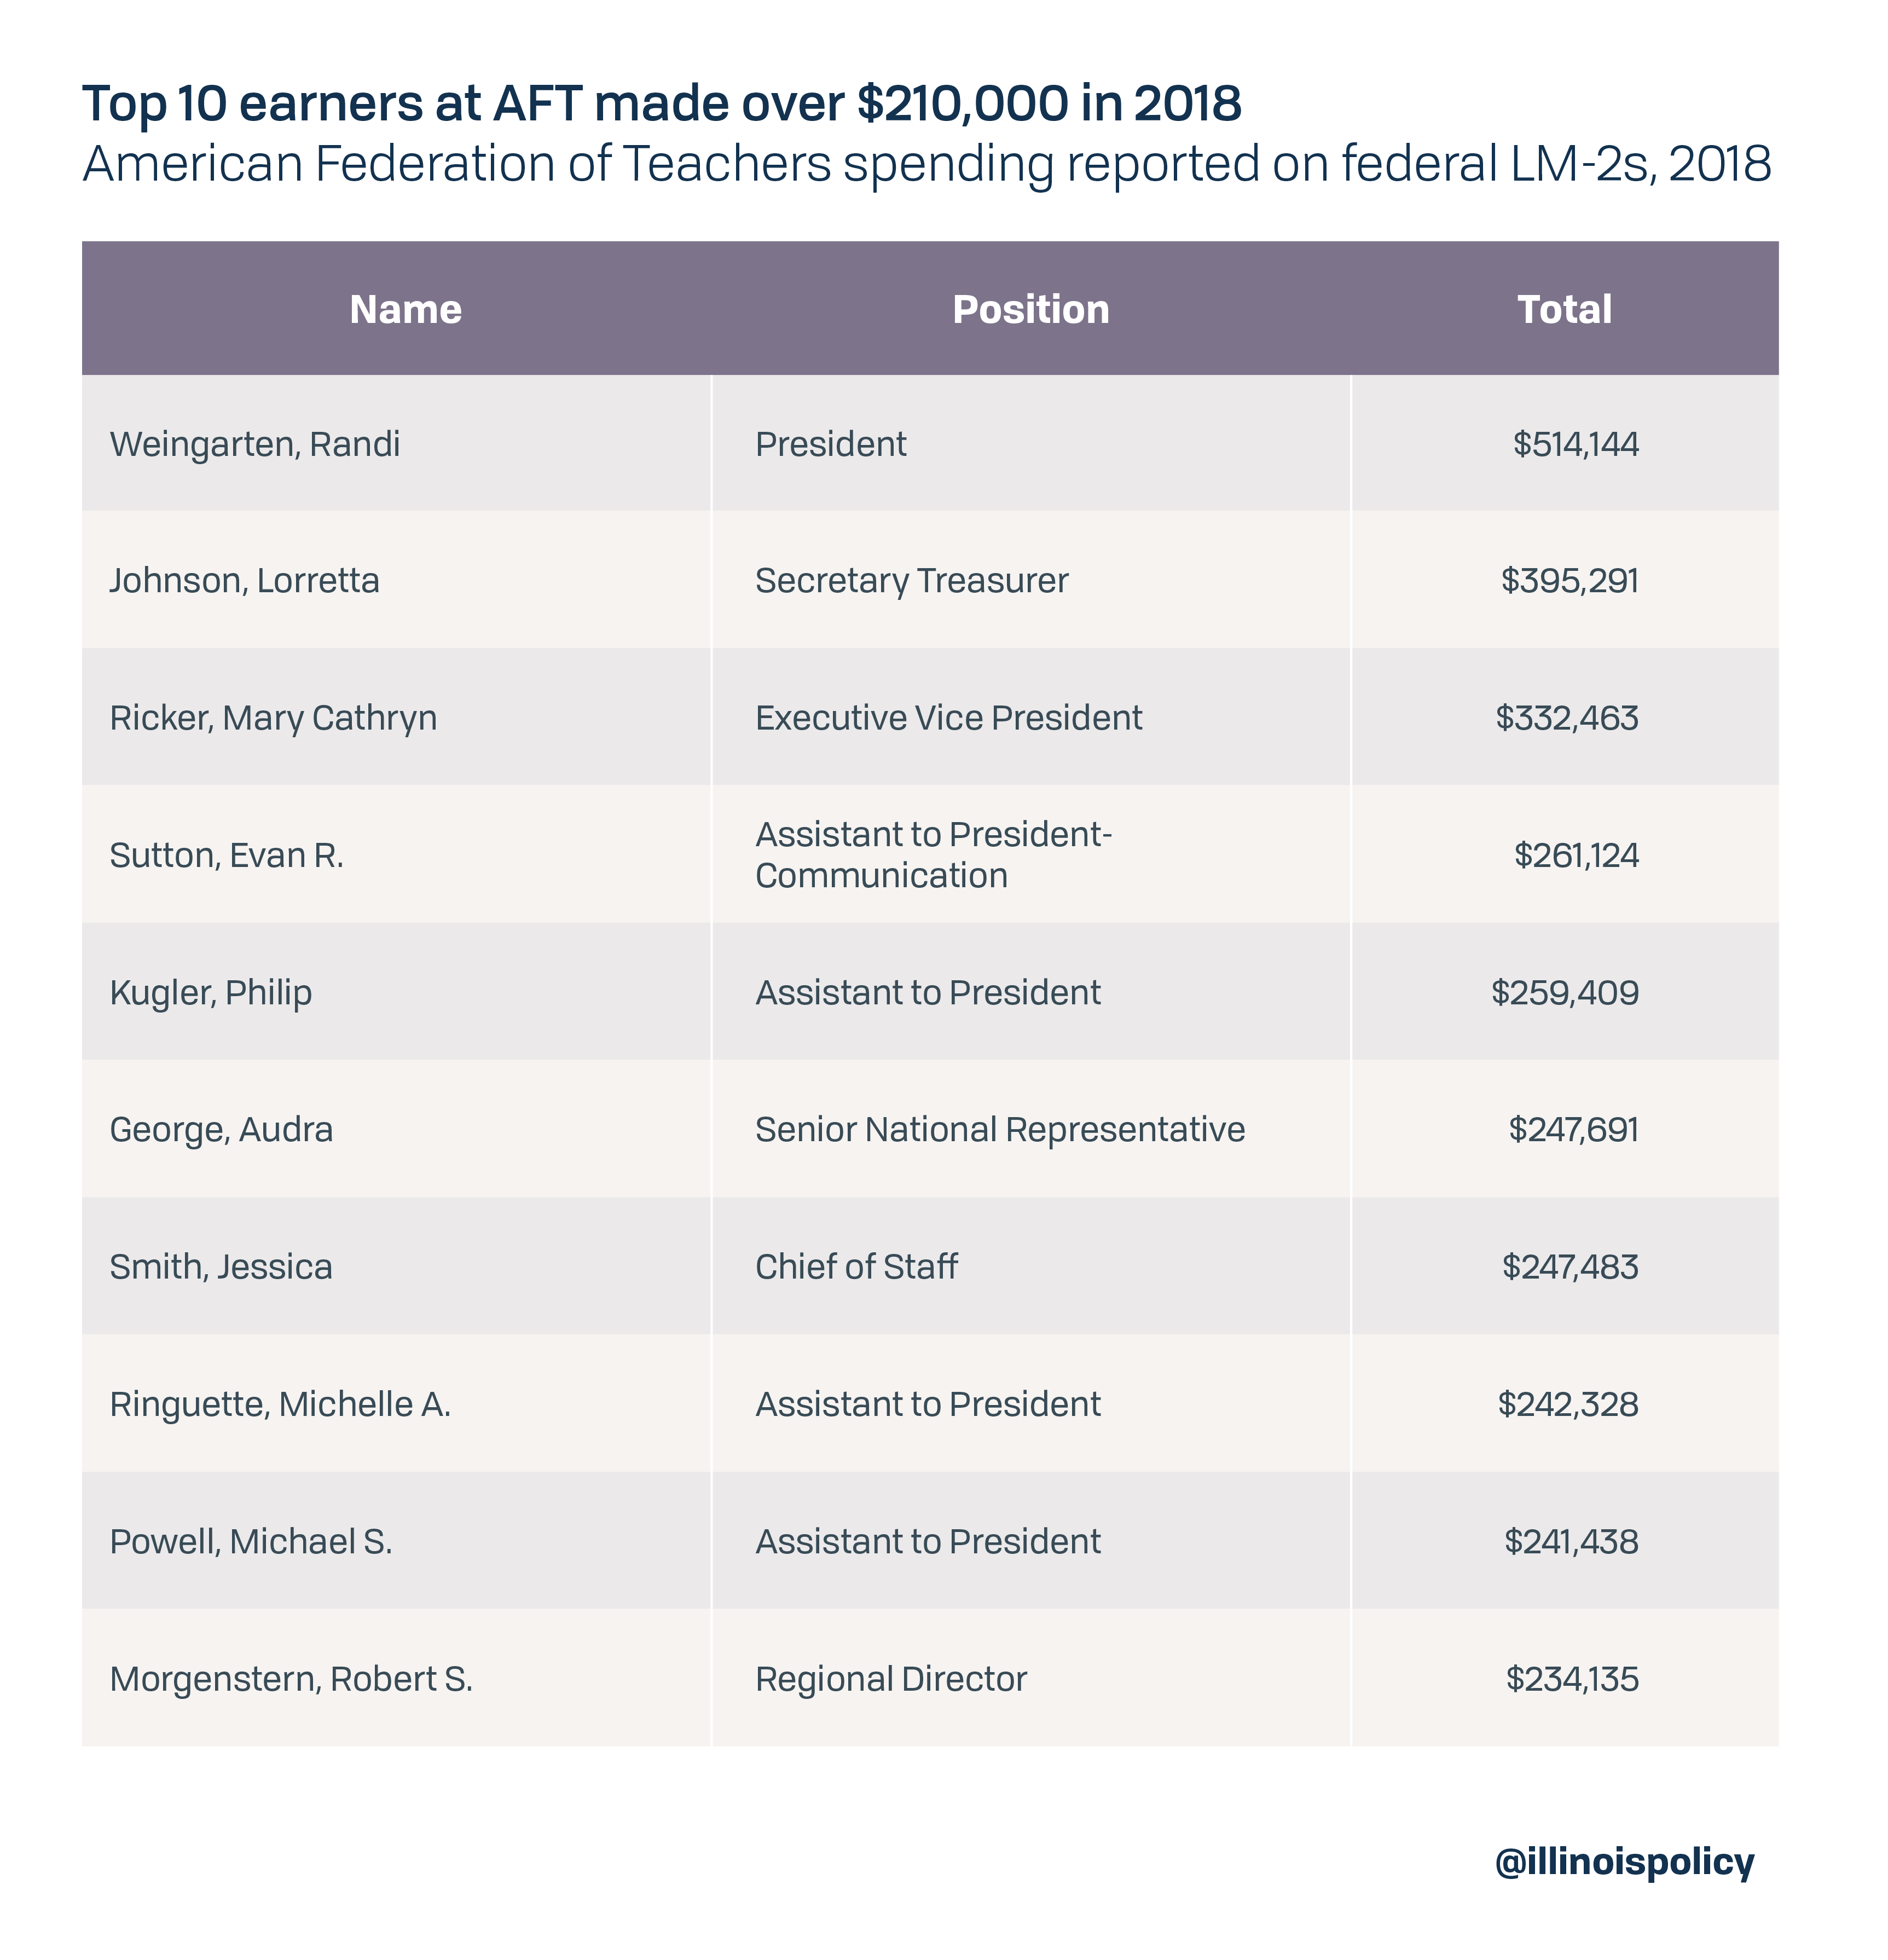 Top 10 earners at AFT made over $210,000 in 2018